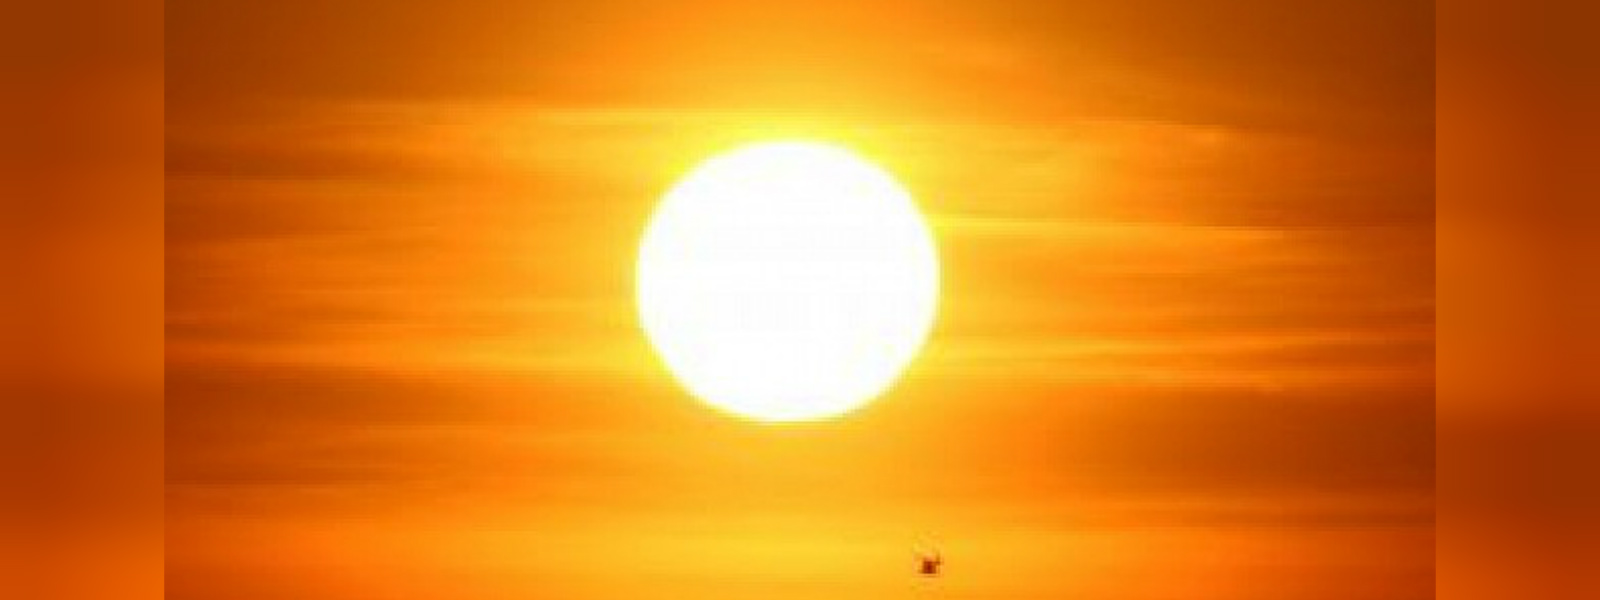 Heat Advisory issued for multiple provinces